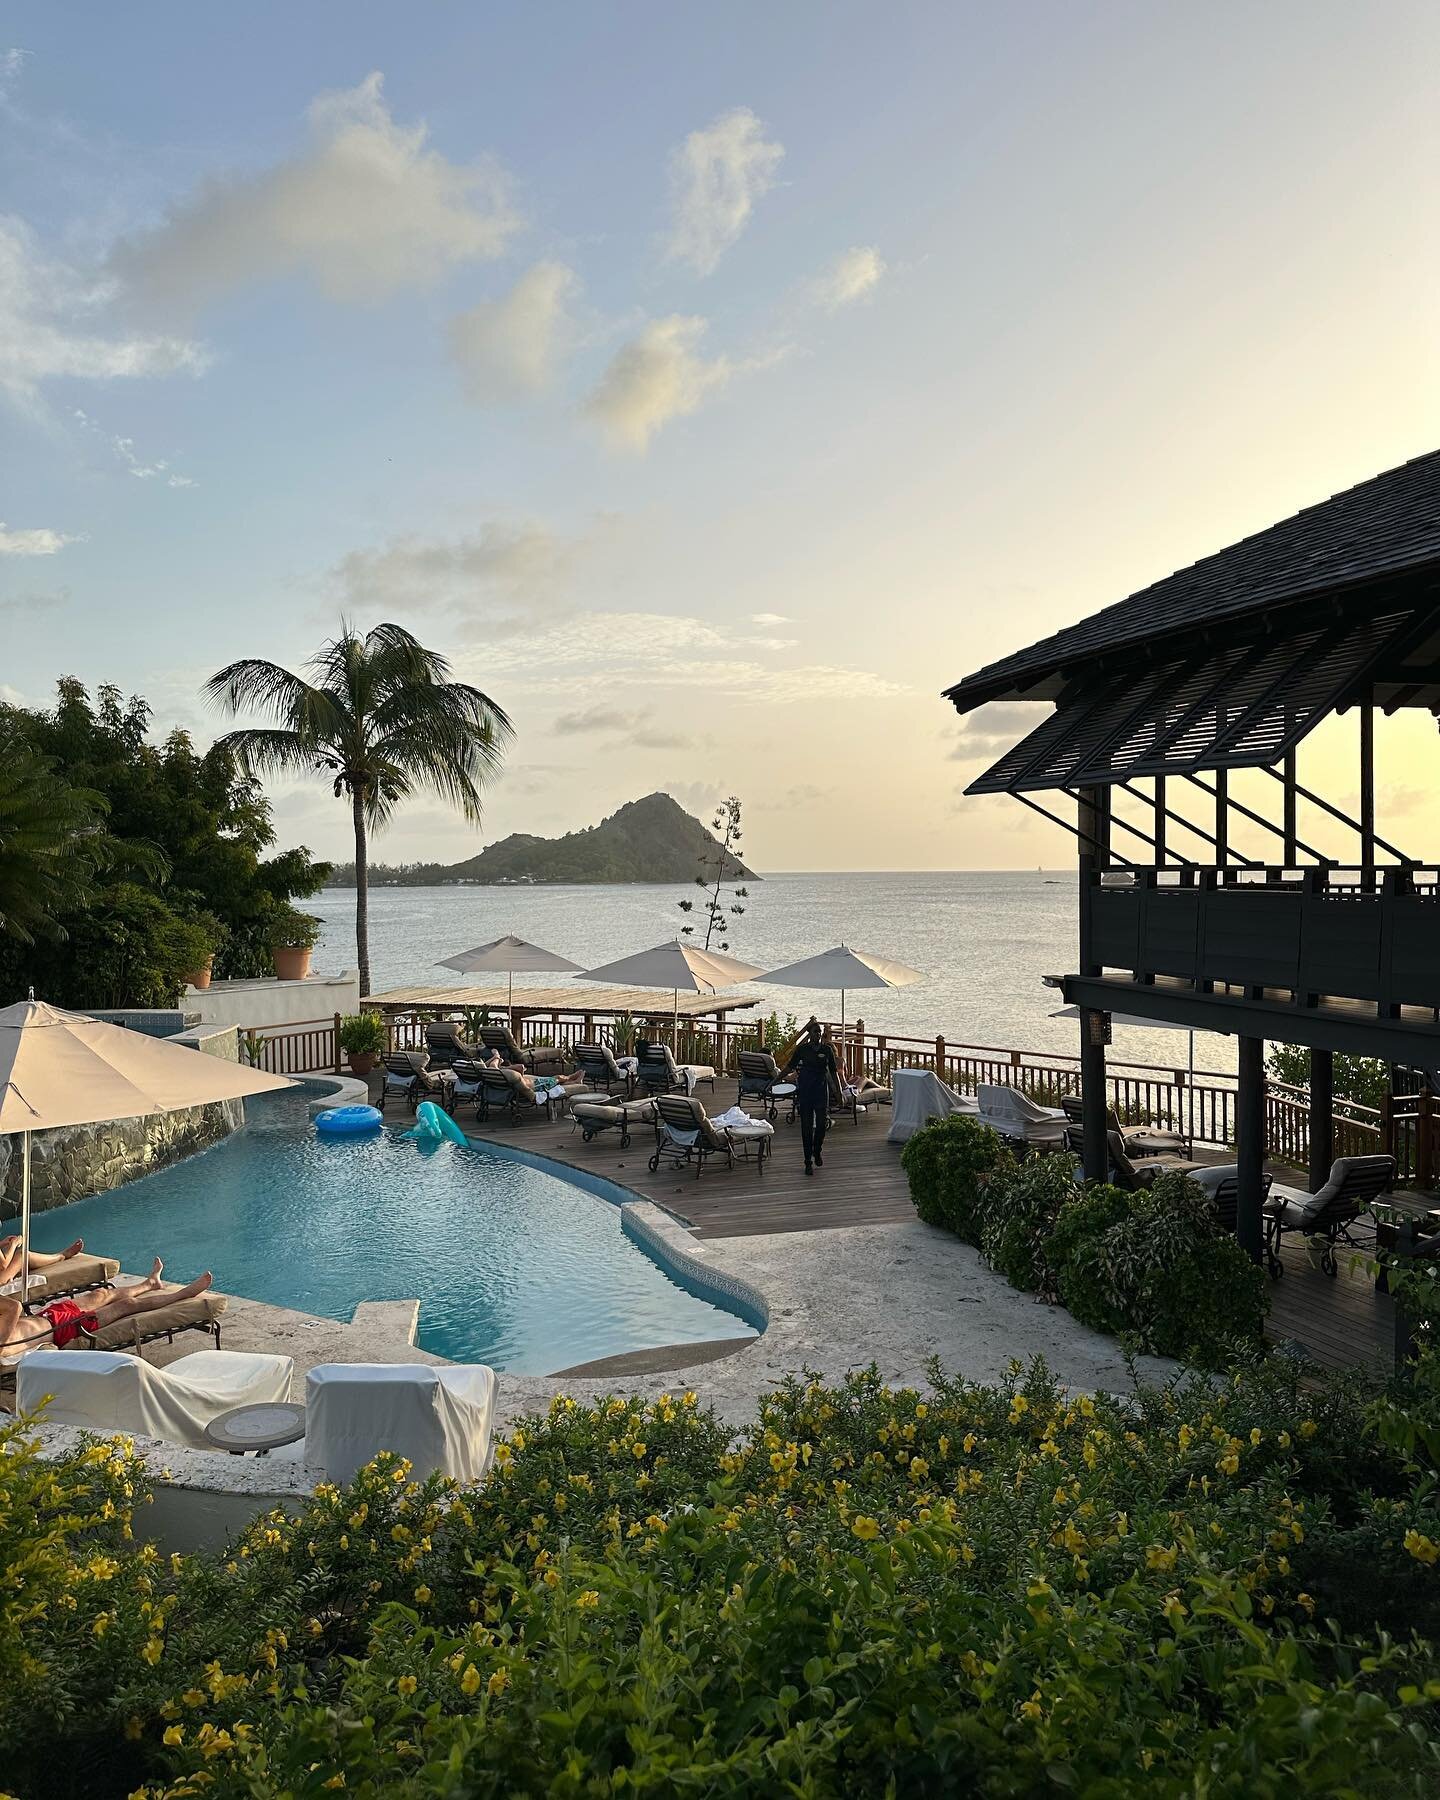 Discover the beauty of this boutique resort in St. Lucia. Stylish recently renovated villa and suite accommodations. I would recommend this resort to couples, honeymooners, or families. Set atop a private ocean front bluff with magical sunset views (